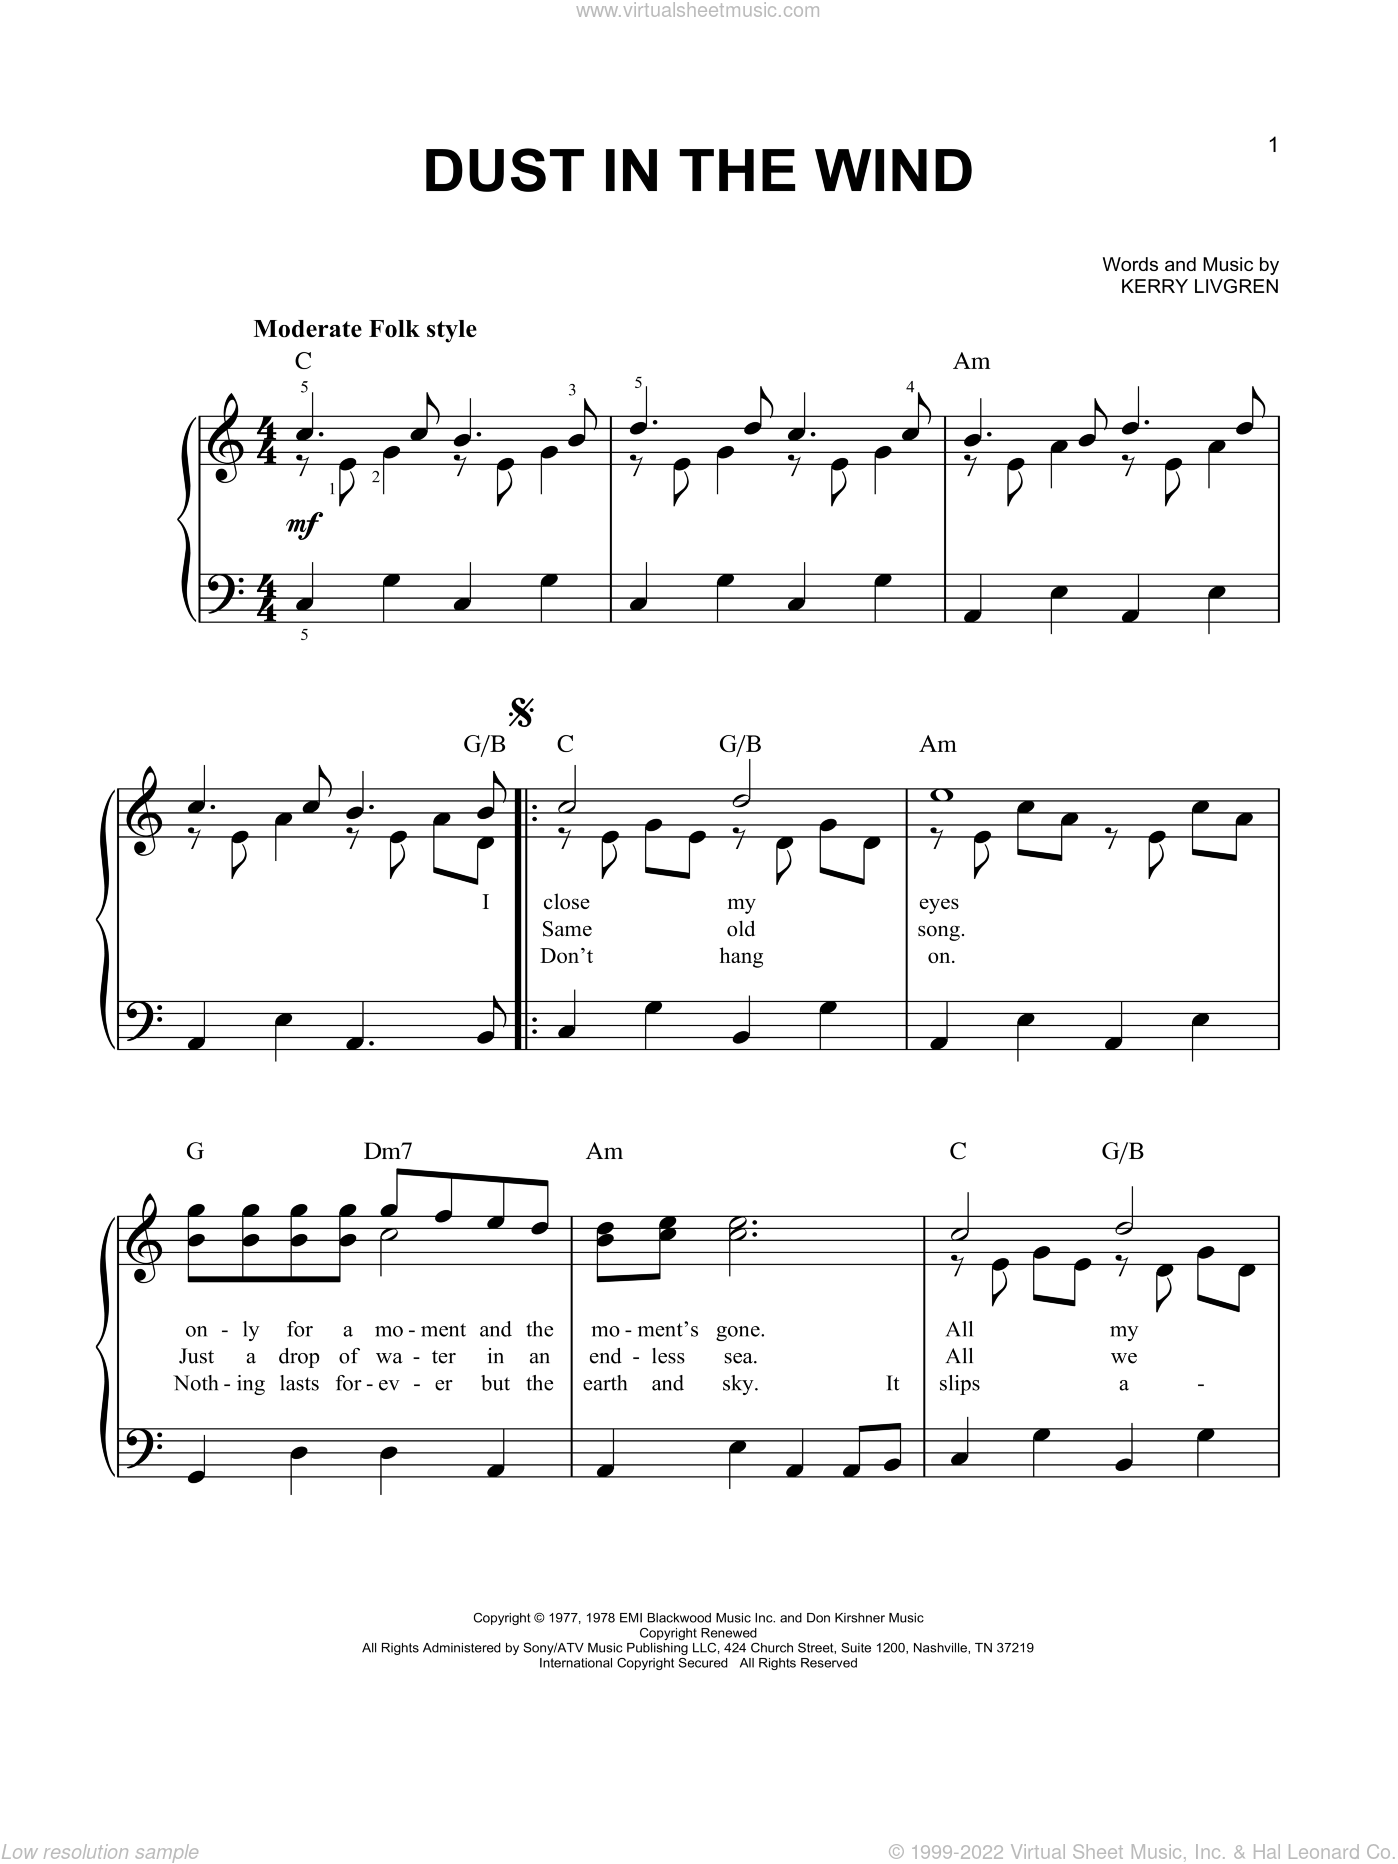 Dust Wind, (easy) sheet music for piano solo